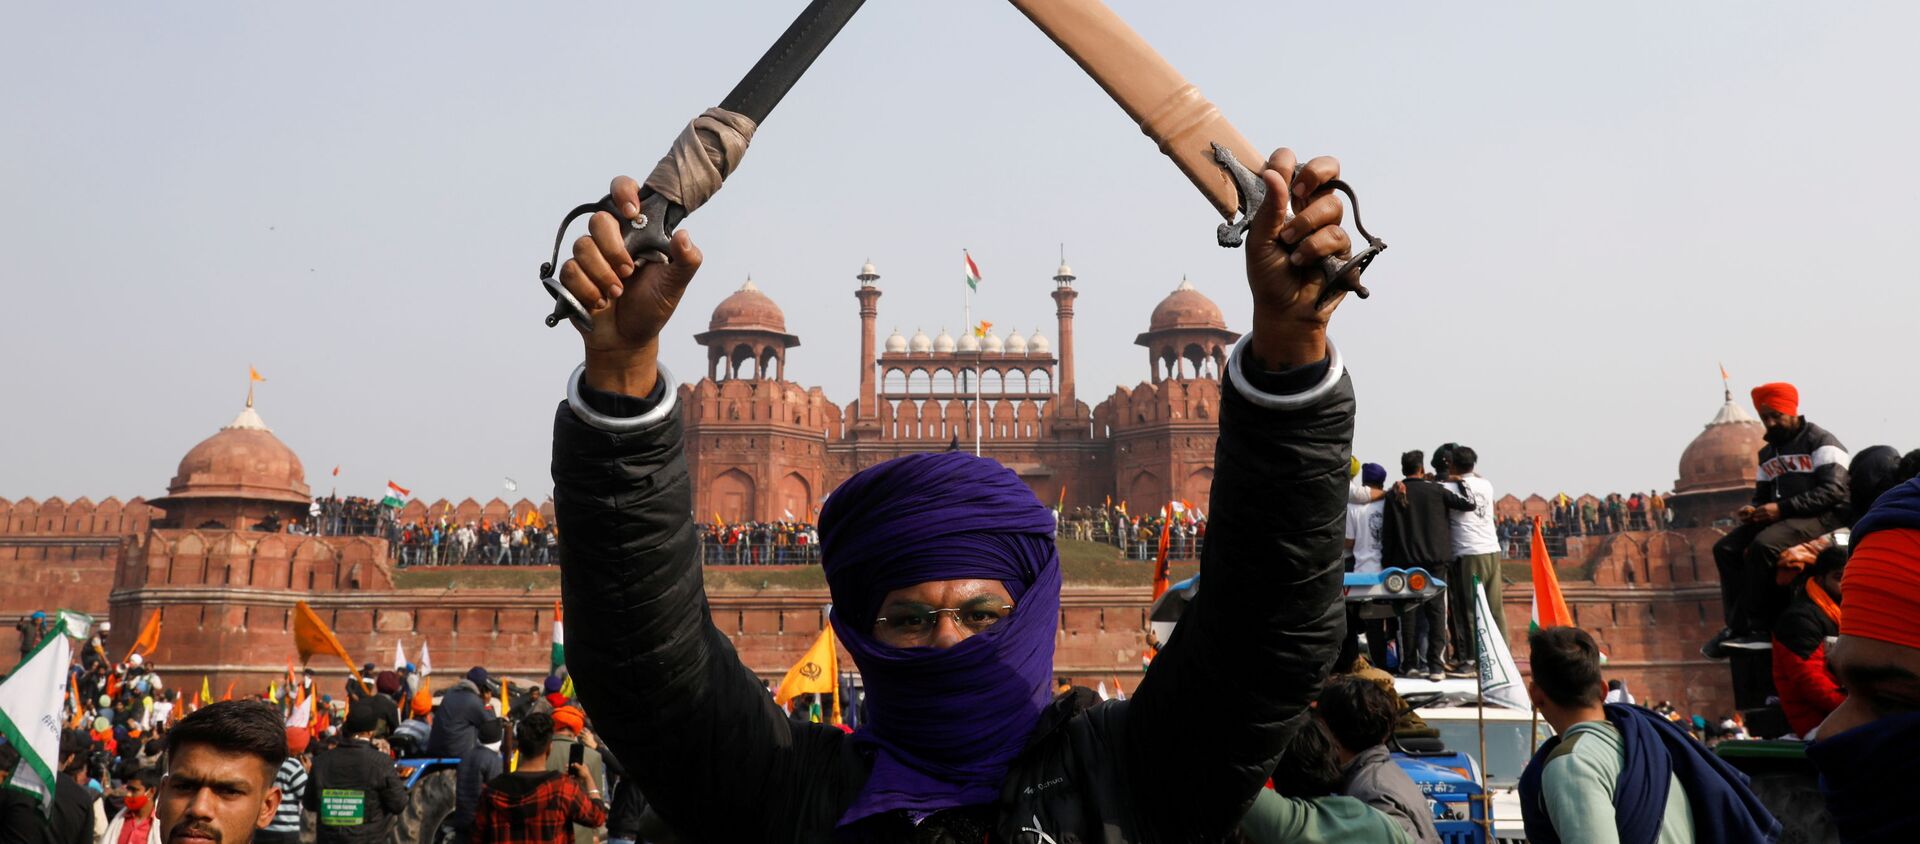 A farmer holds a sword during a protest against farm laws introduced by the government, at the historic Red Fort in Delhi, India, January 26, 2021 - Sputnik International, 1920, 26.01.2021